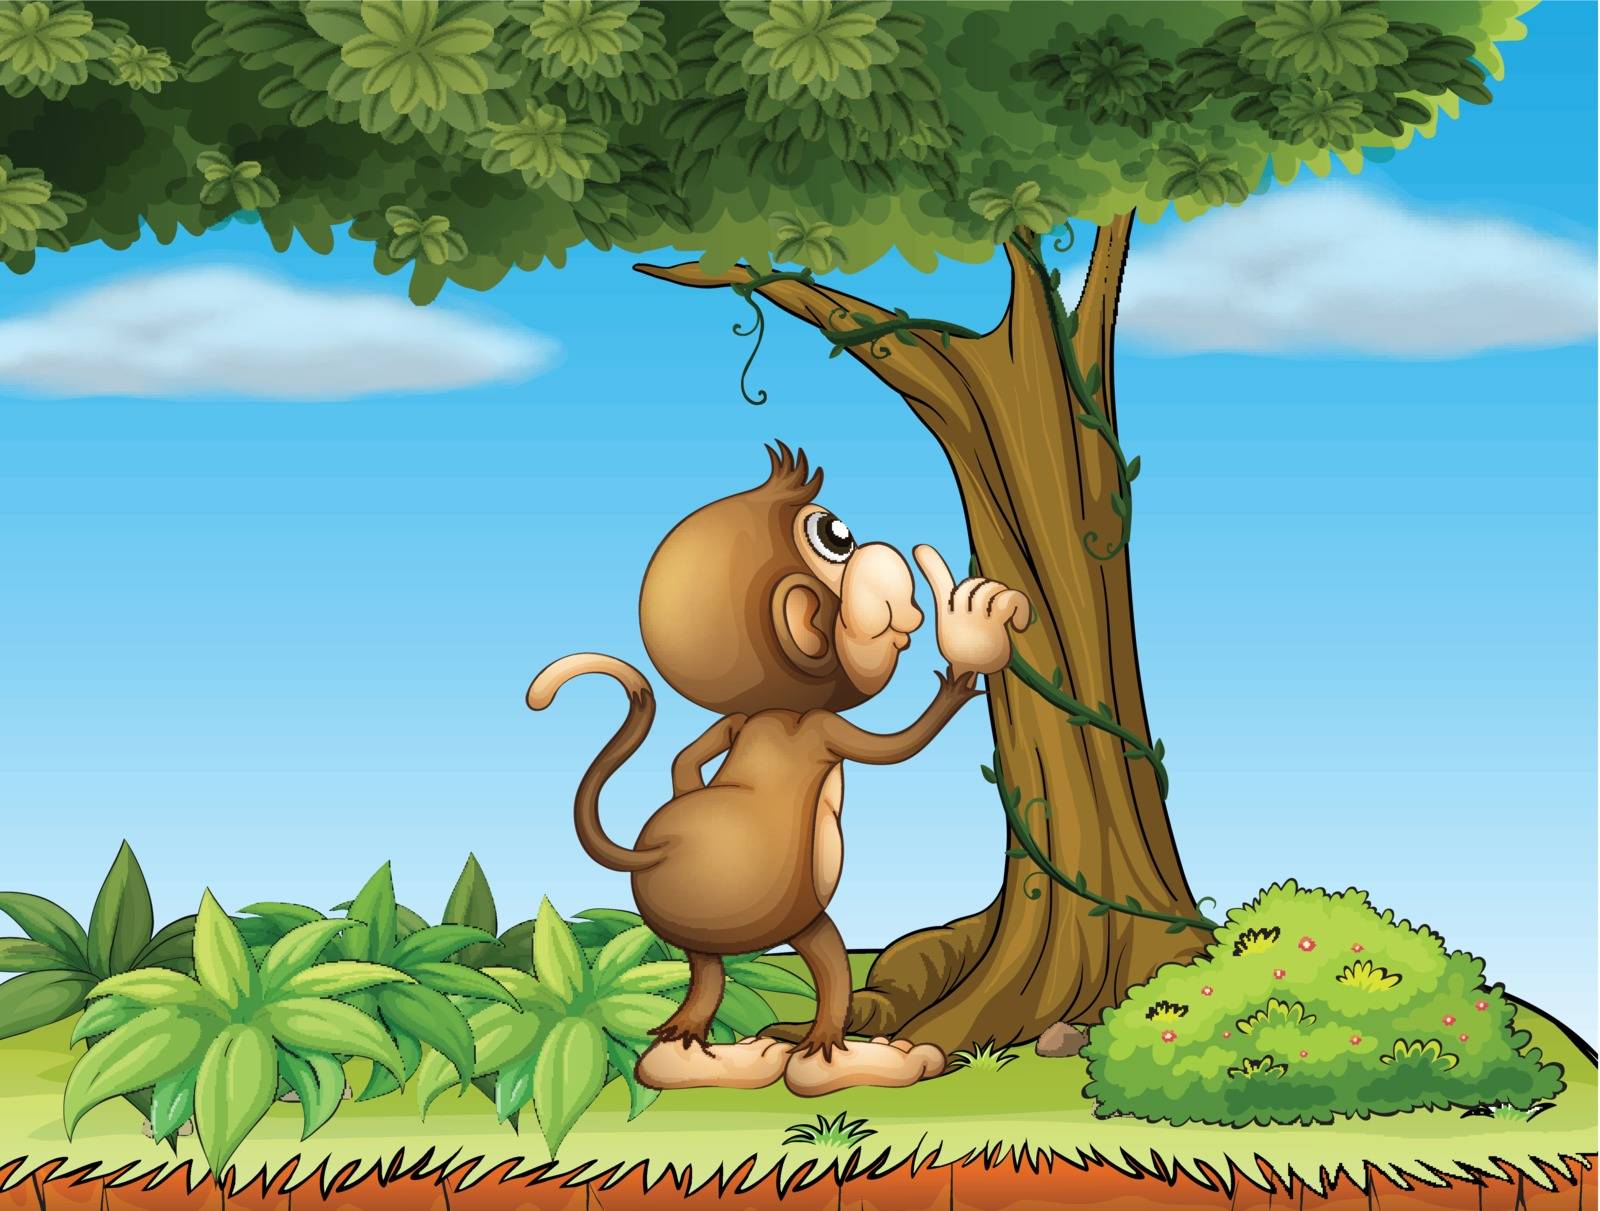 Illustration of a monkey watching a tree